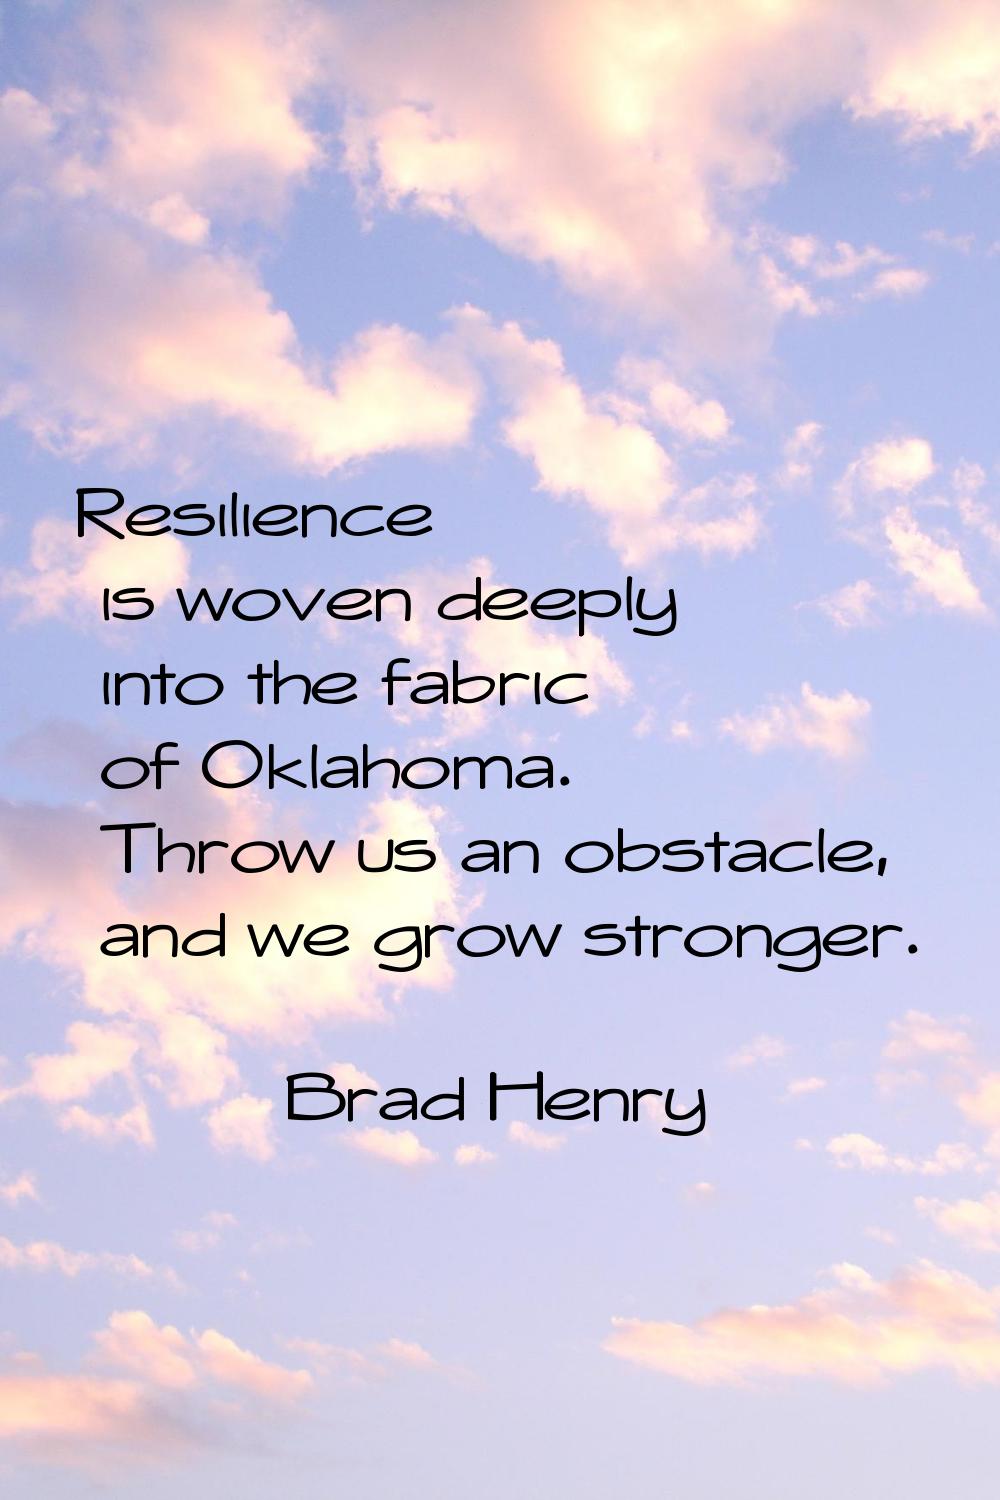 Resilience is woven deeply into the fabric of Oklahoma. Throw us an obstacle, and we grow stronger.